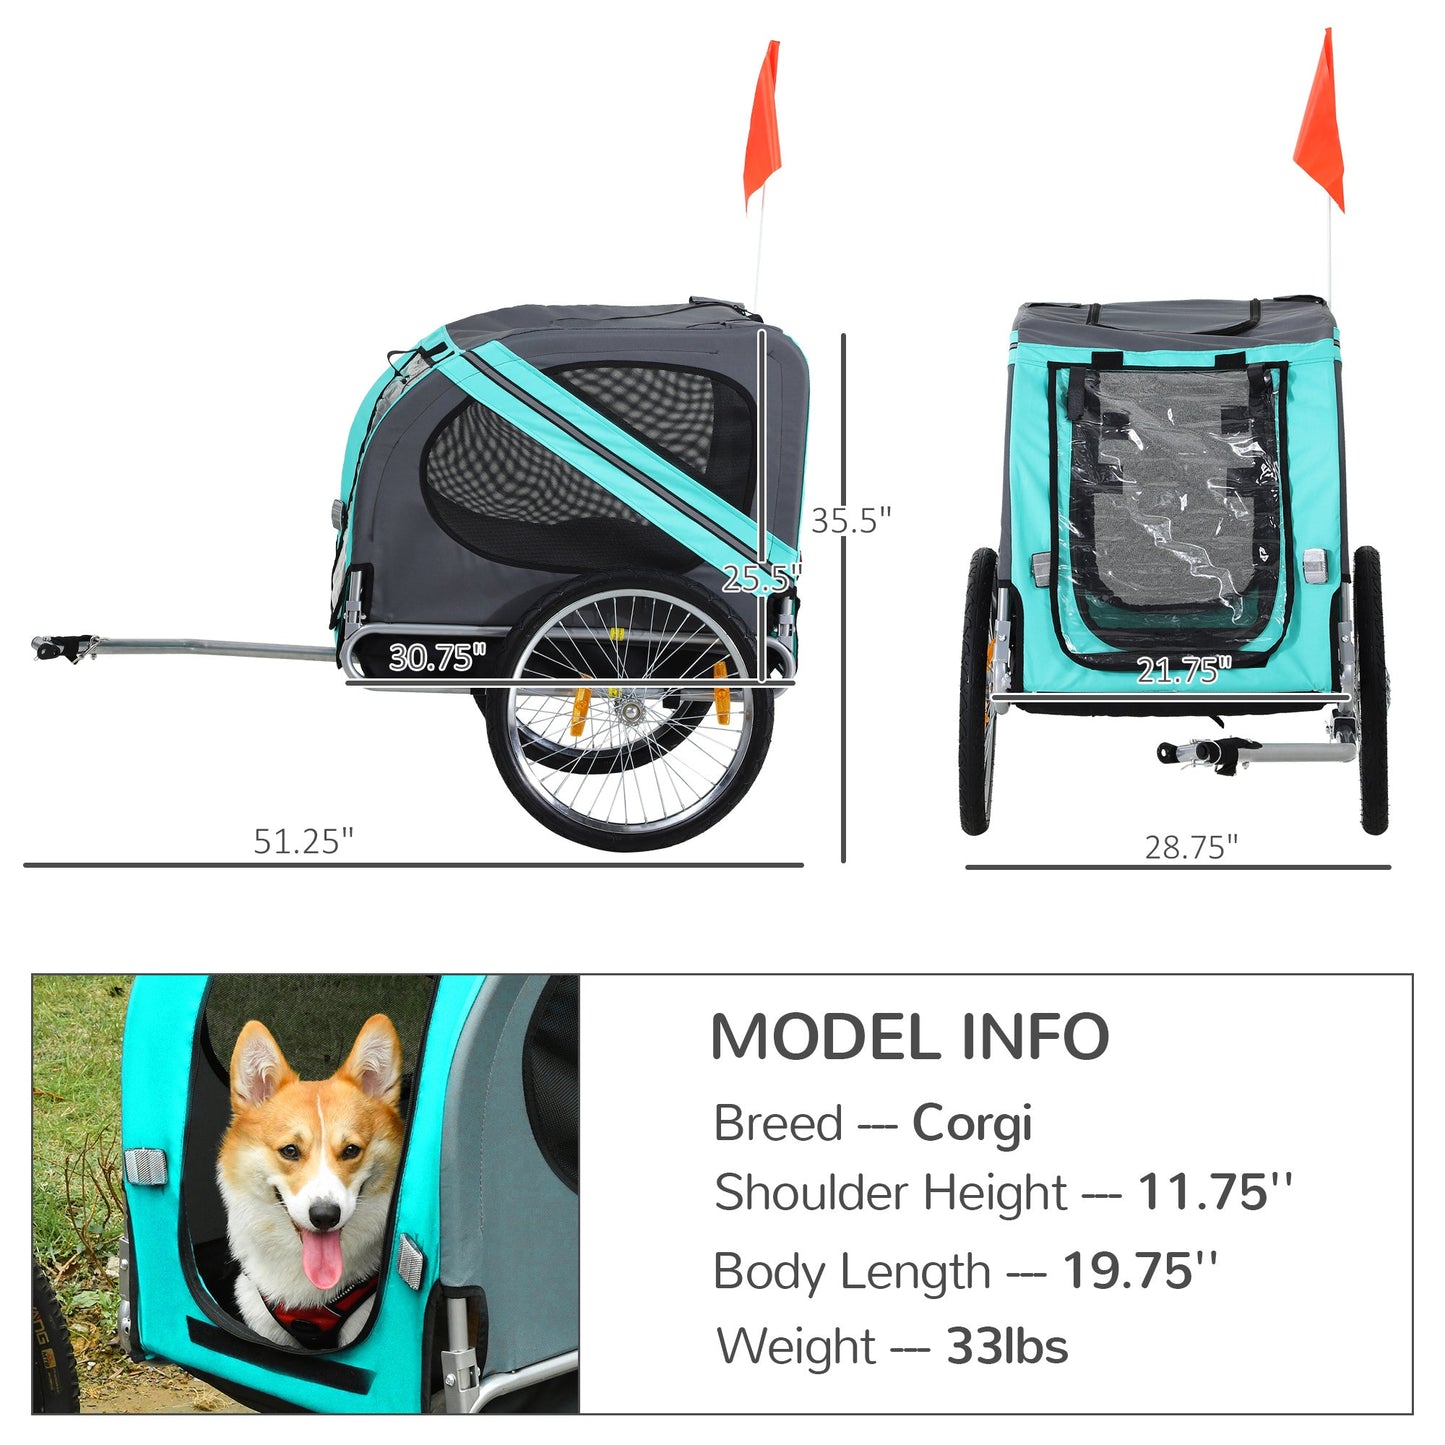 -Aosom Bike Trailer Cargo Cart for Dogs and Pets with 3 Entrances Large Wheels for Off-Road & Mesh Screen, Blue/Grey - Outdoor Style Company